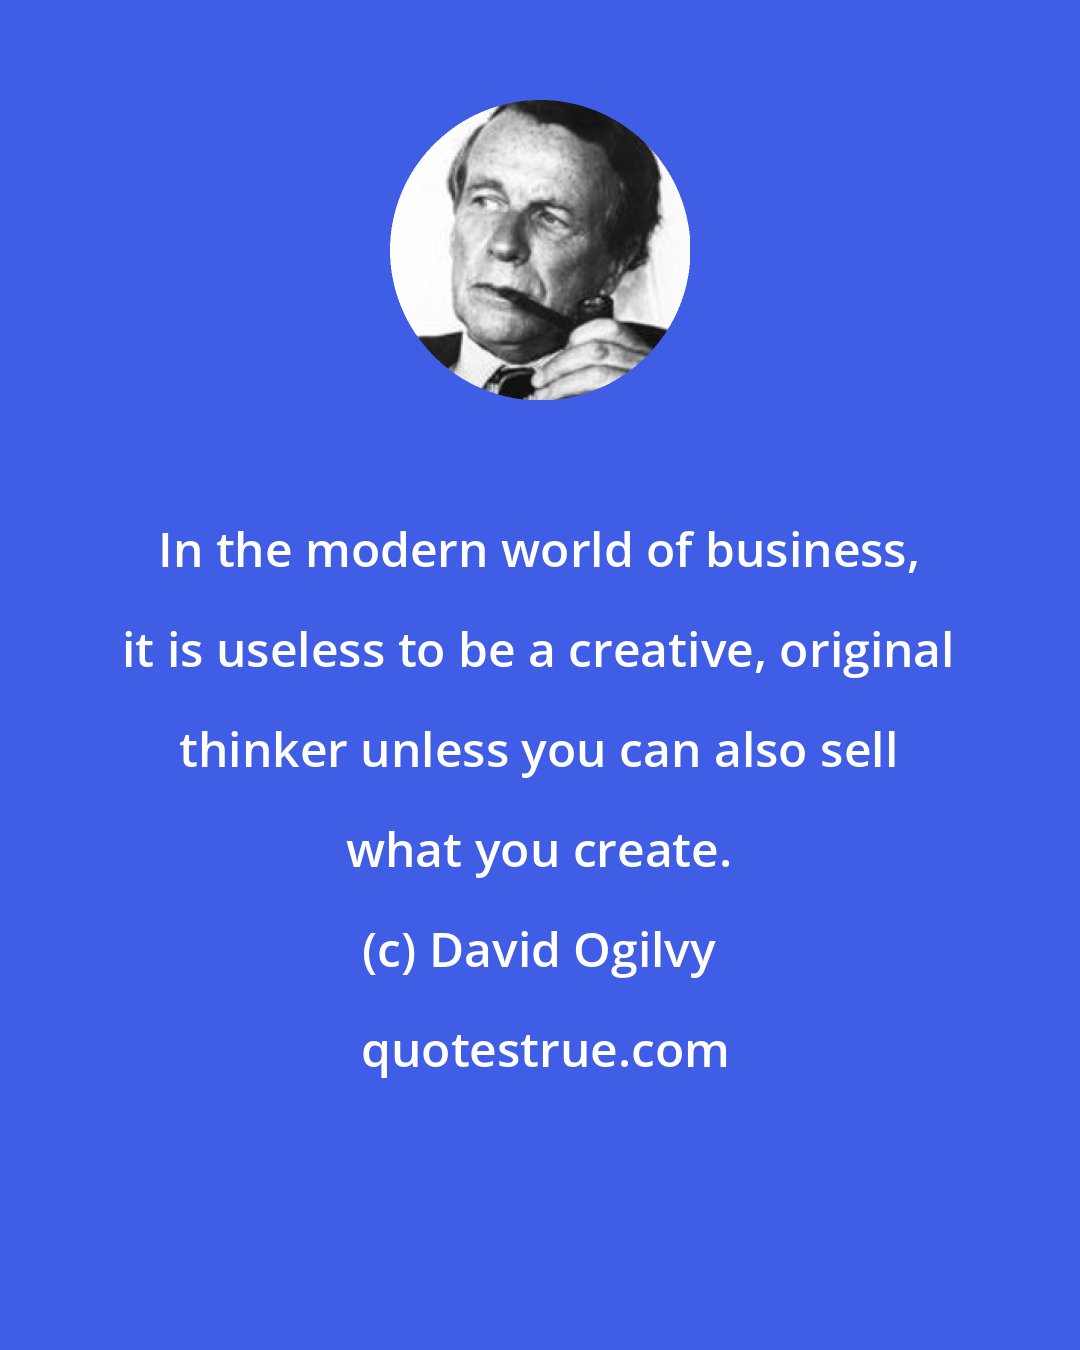 David Ogilvy: In the modern world of business, it is useless to be a creative, original thinker unless you can also sell what you create.